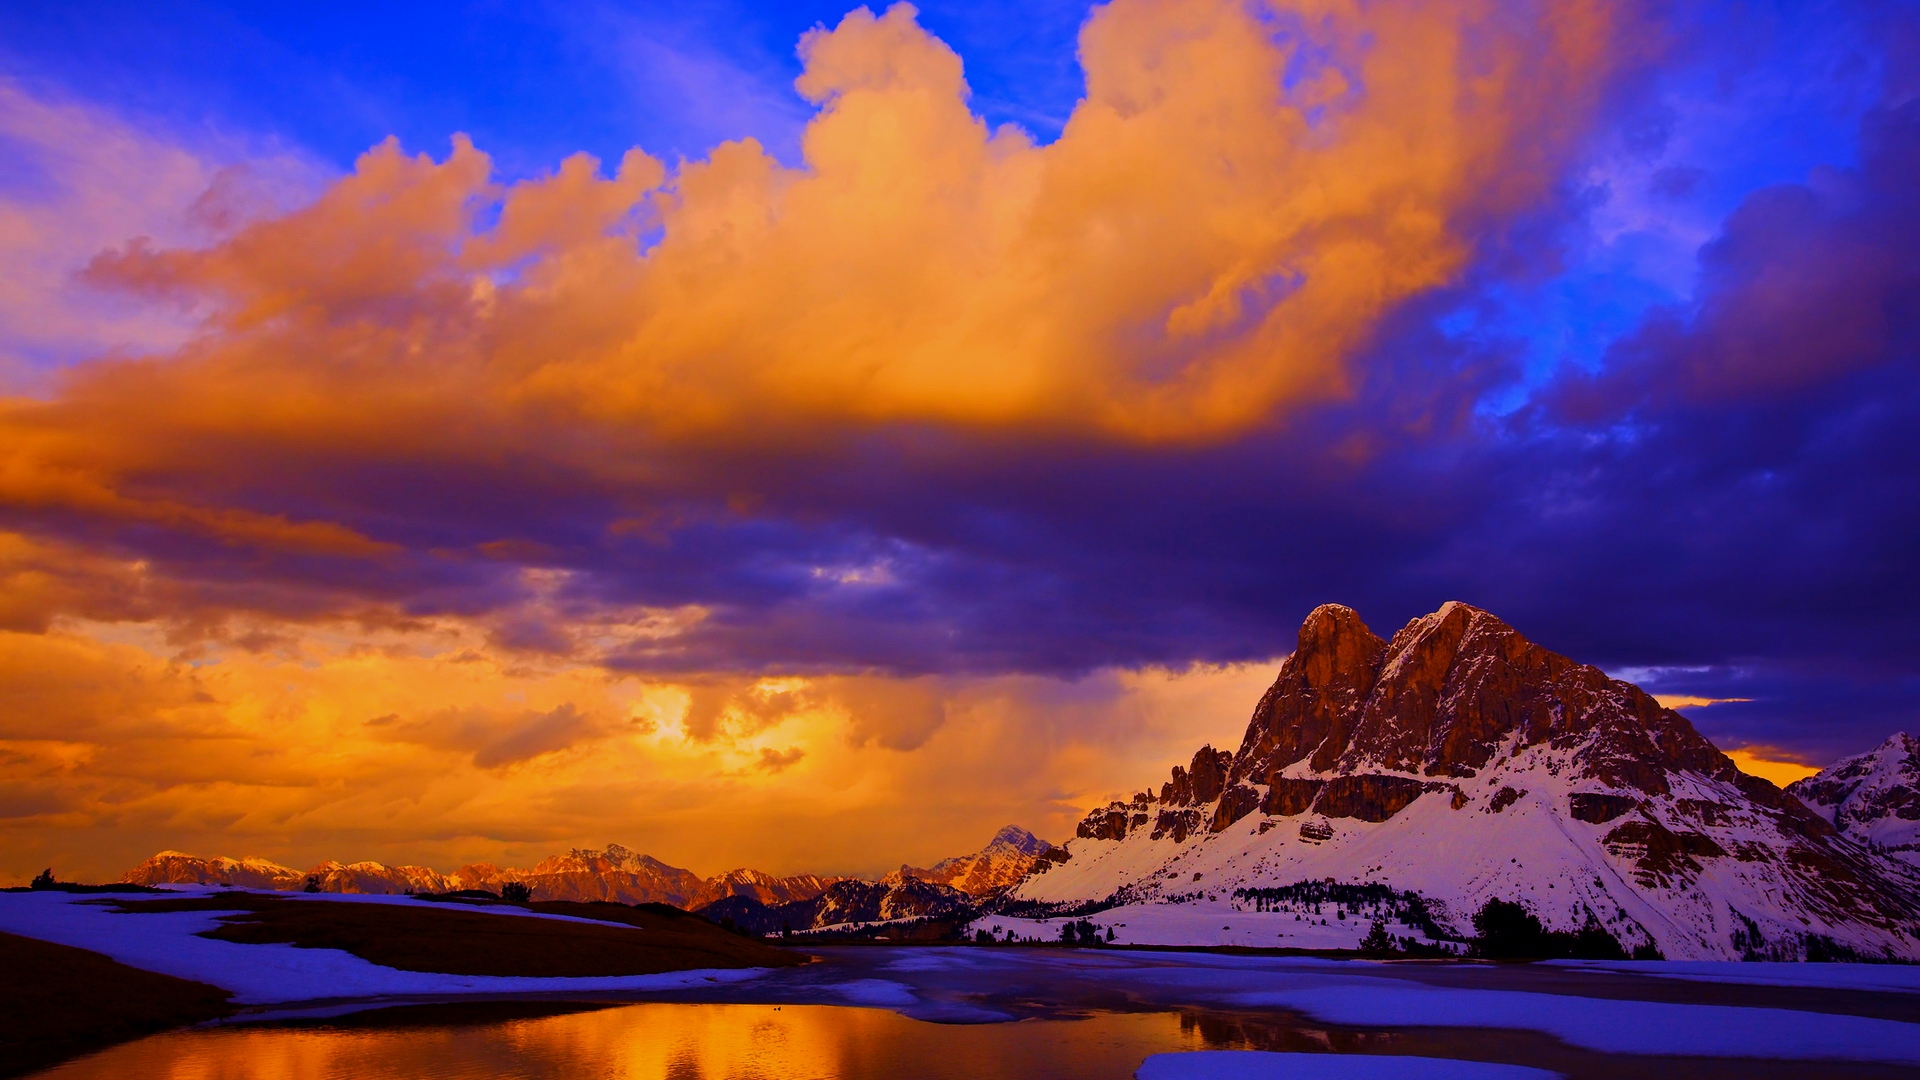 Snowy Mountains Sunset HD Wallpaper Background Image